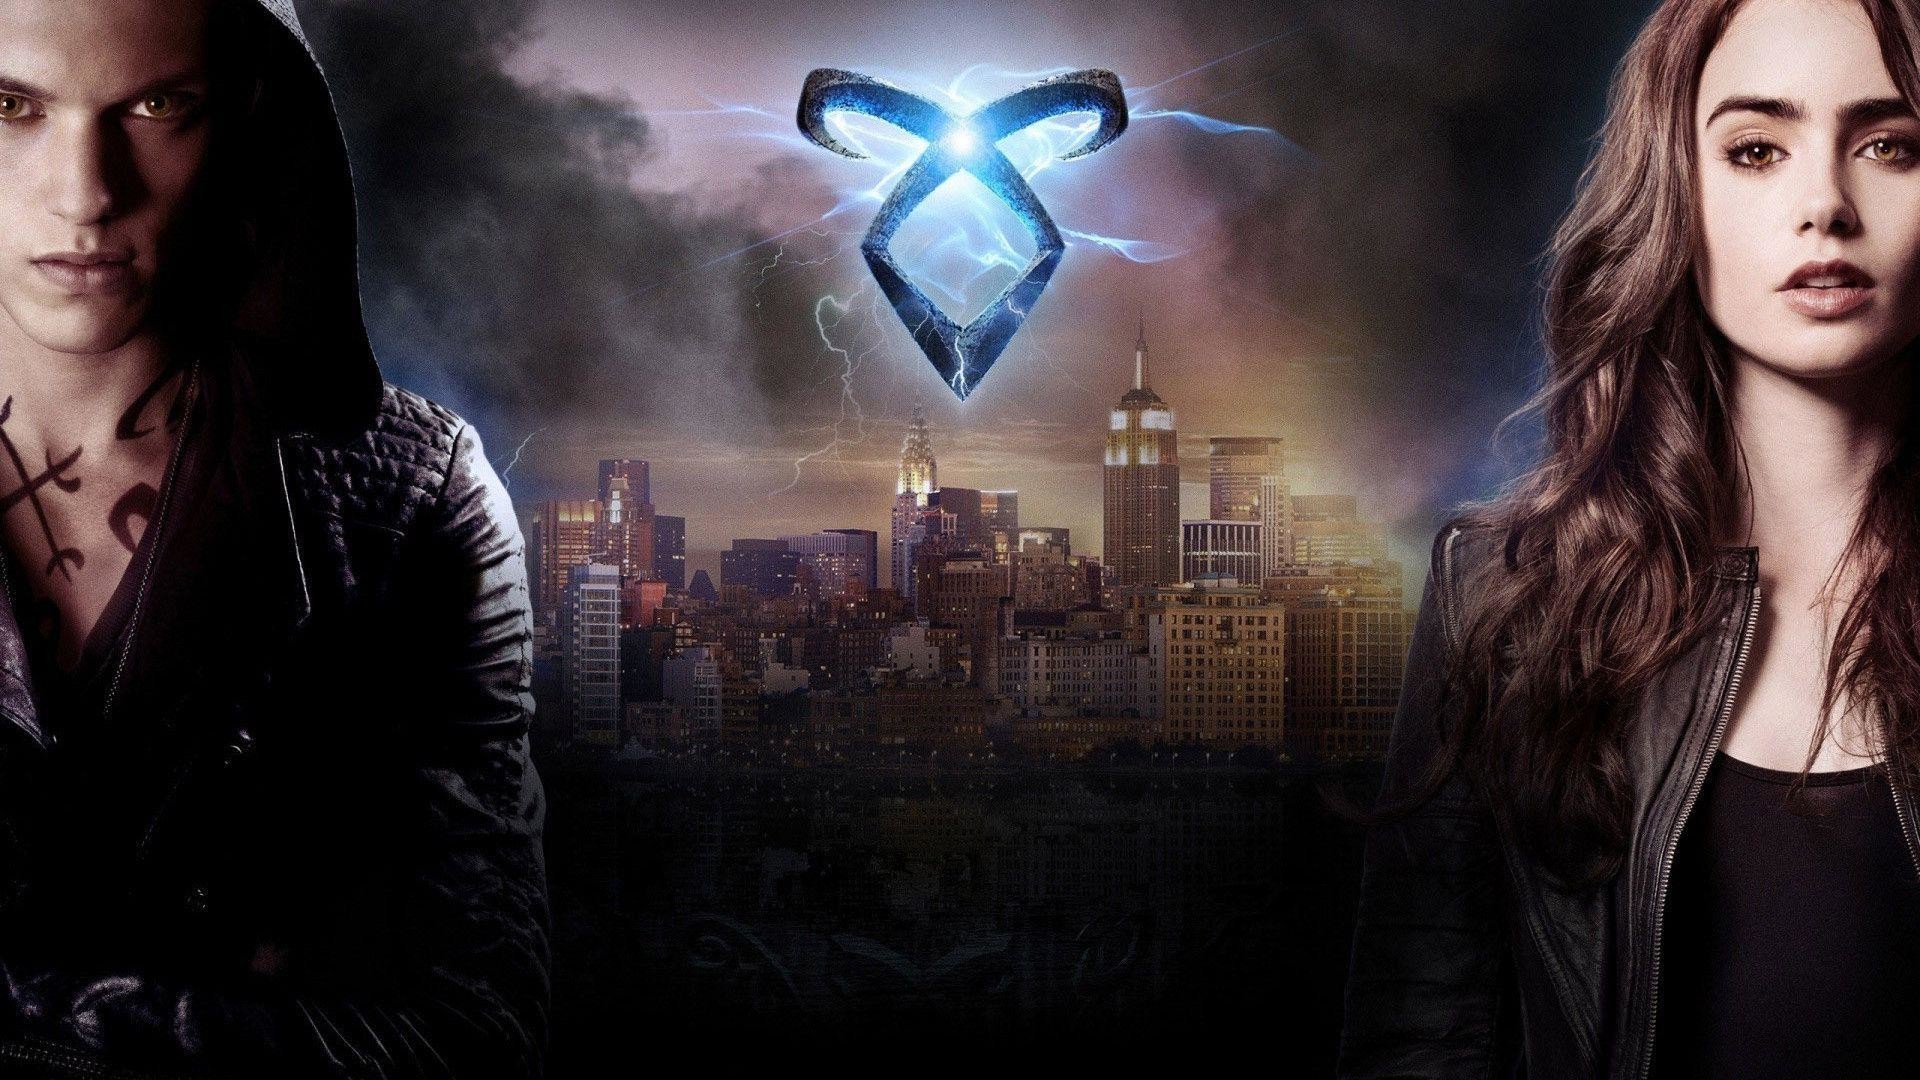 1920x1080 The Mortal Instruments Angelic Rune Wallpaper by NoahAtrid on .